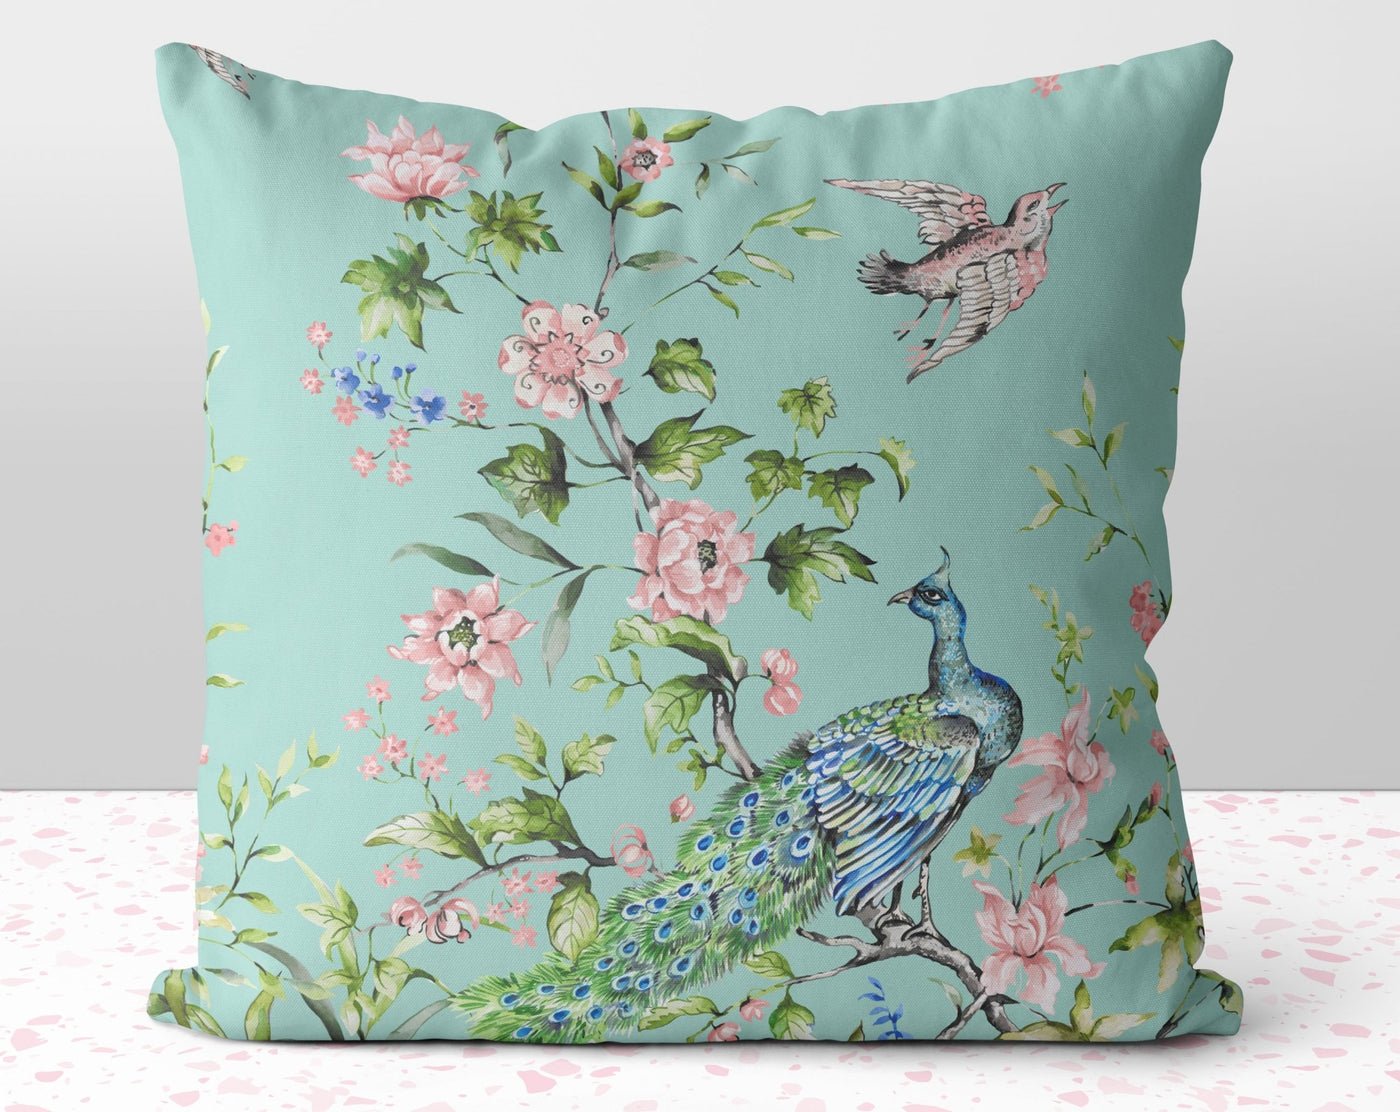 Floral Peacock Chinoiserie Flowers Pink on Mint Green Square Pillow with Cover Throw with Insert - Cush Potato Pillows